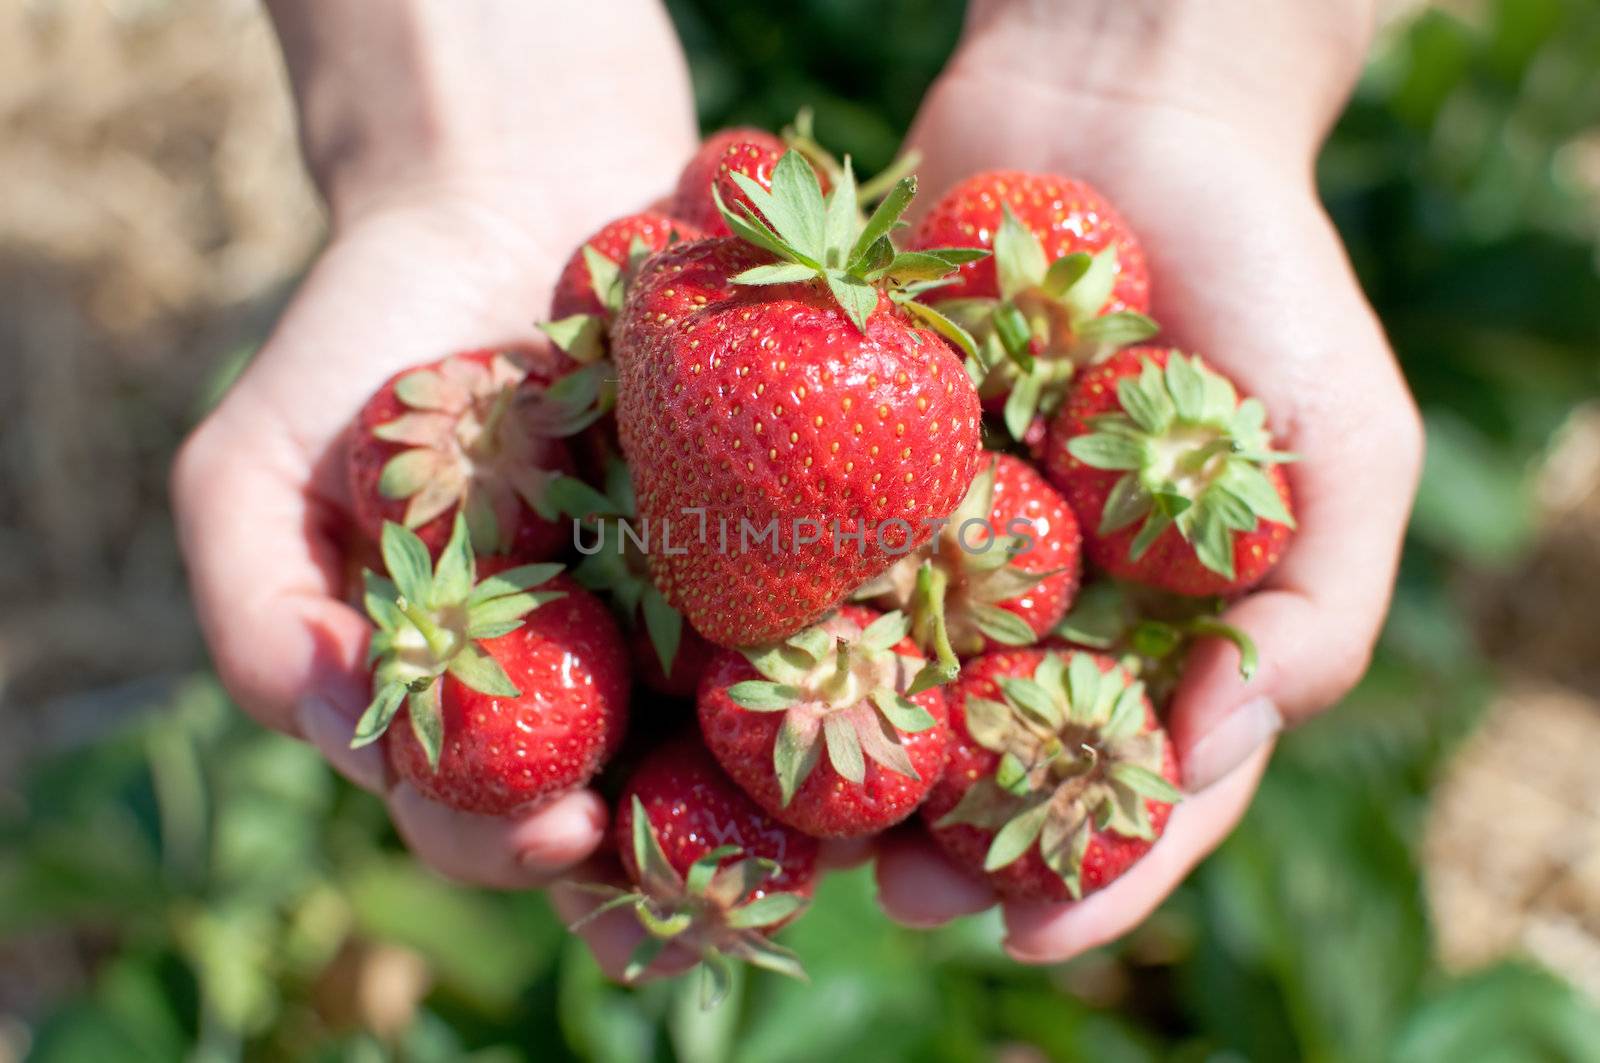 Fresh picked strawberries held over strawberry plants